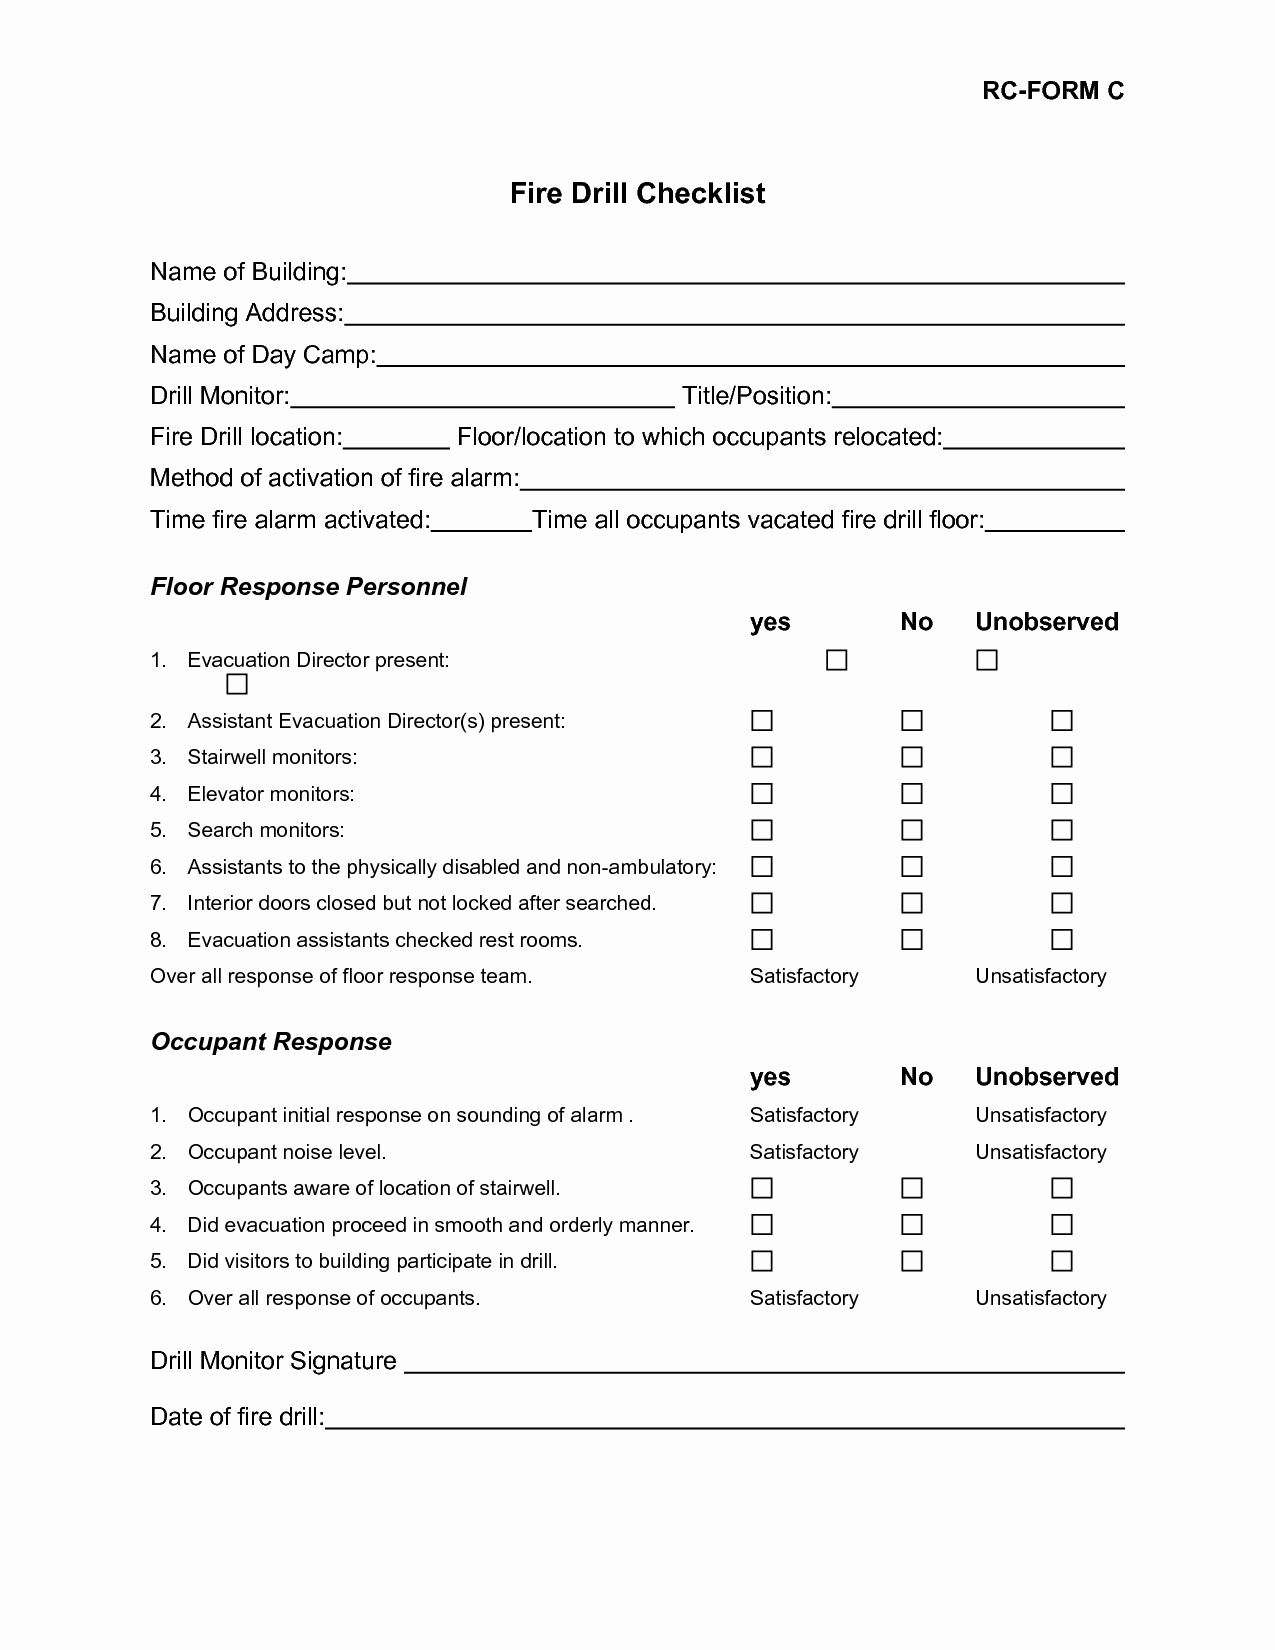 Fire Drill Report Template Lovely Best S Of Emergency Drill Checklist Emergency